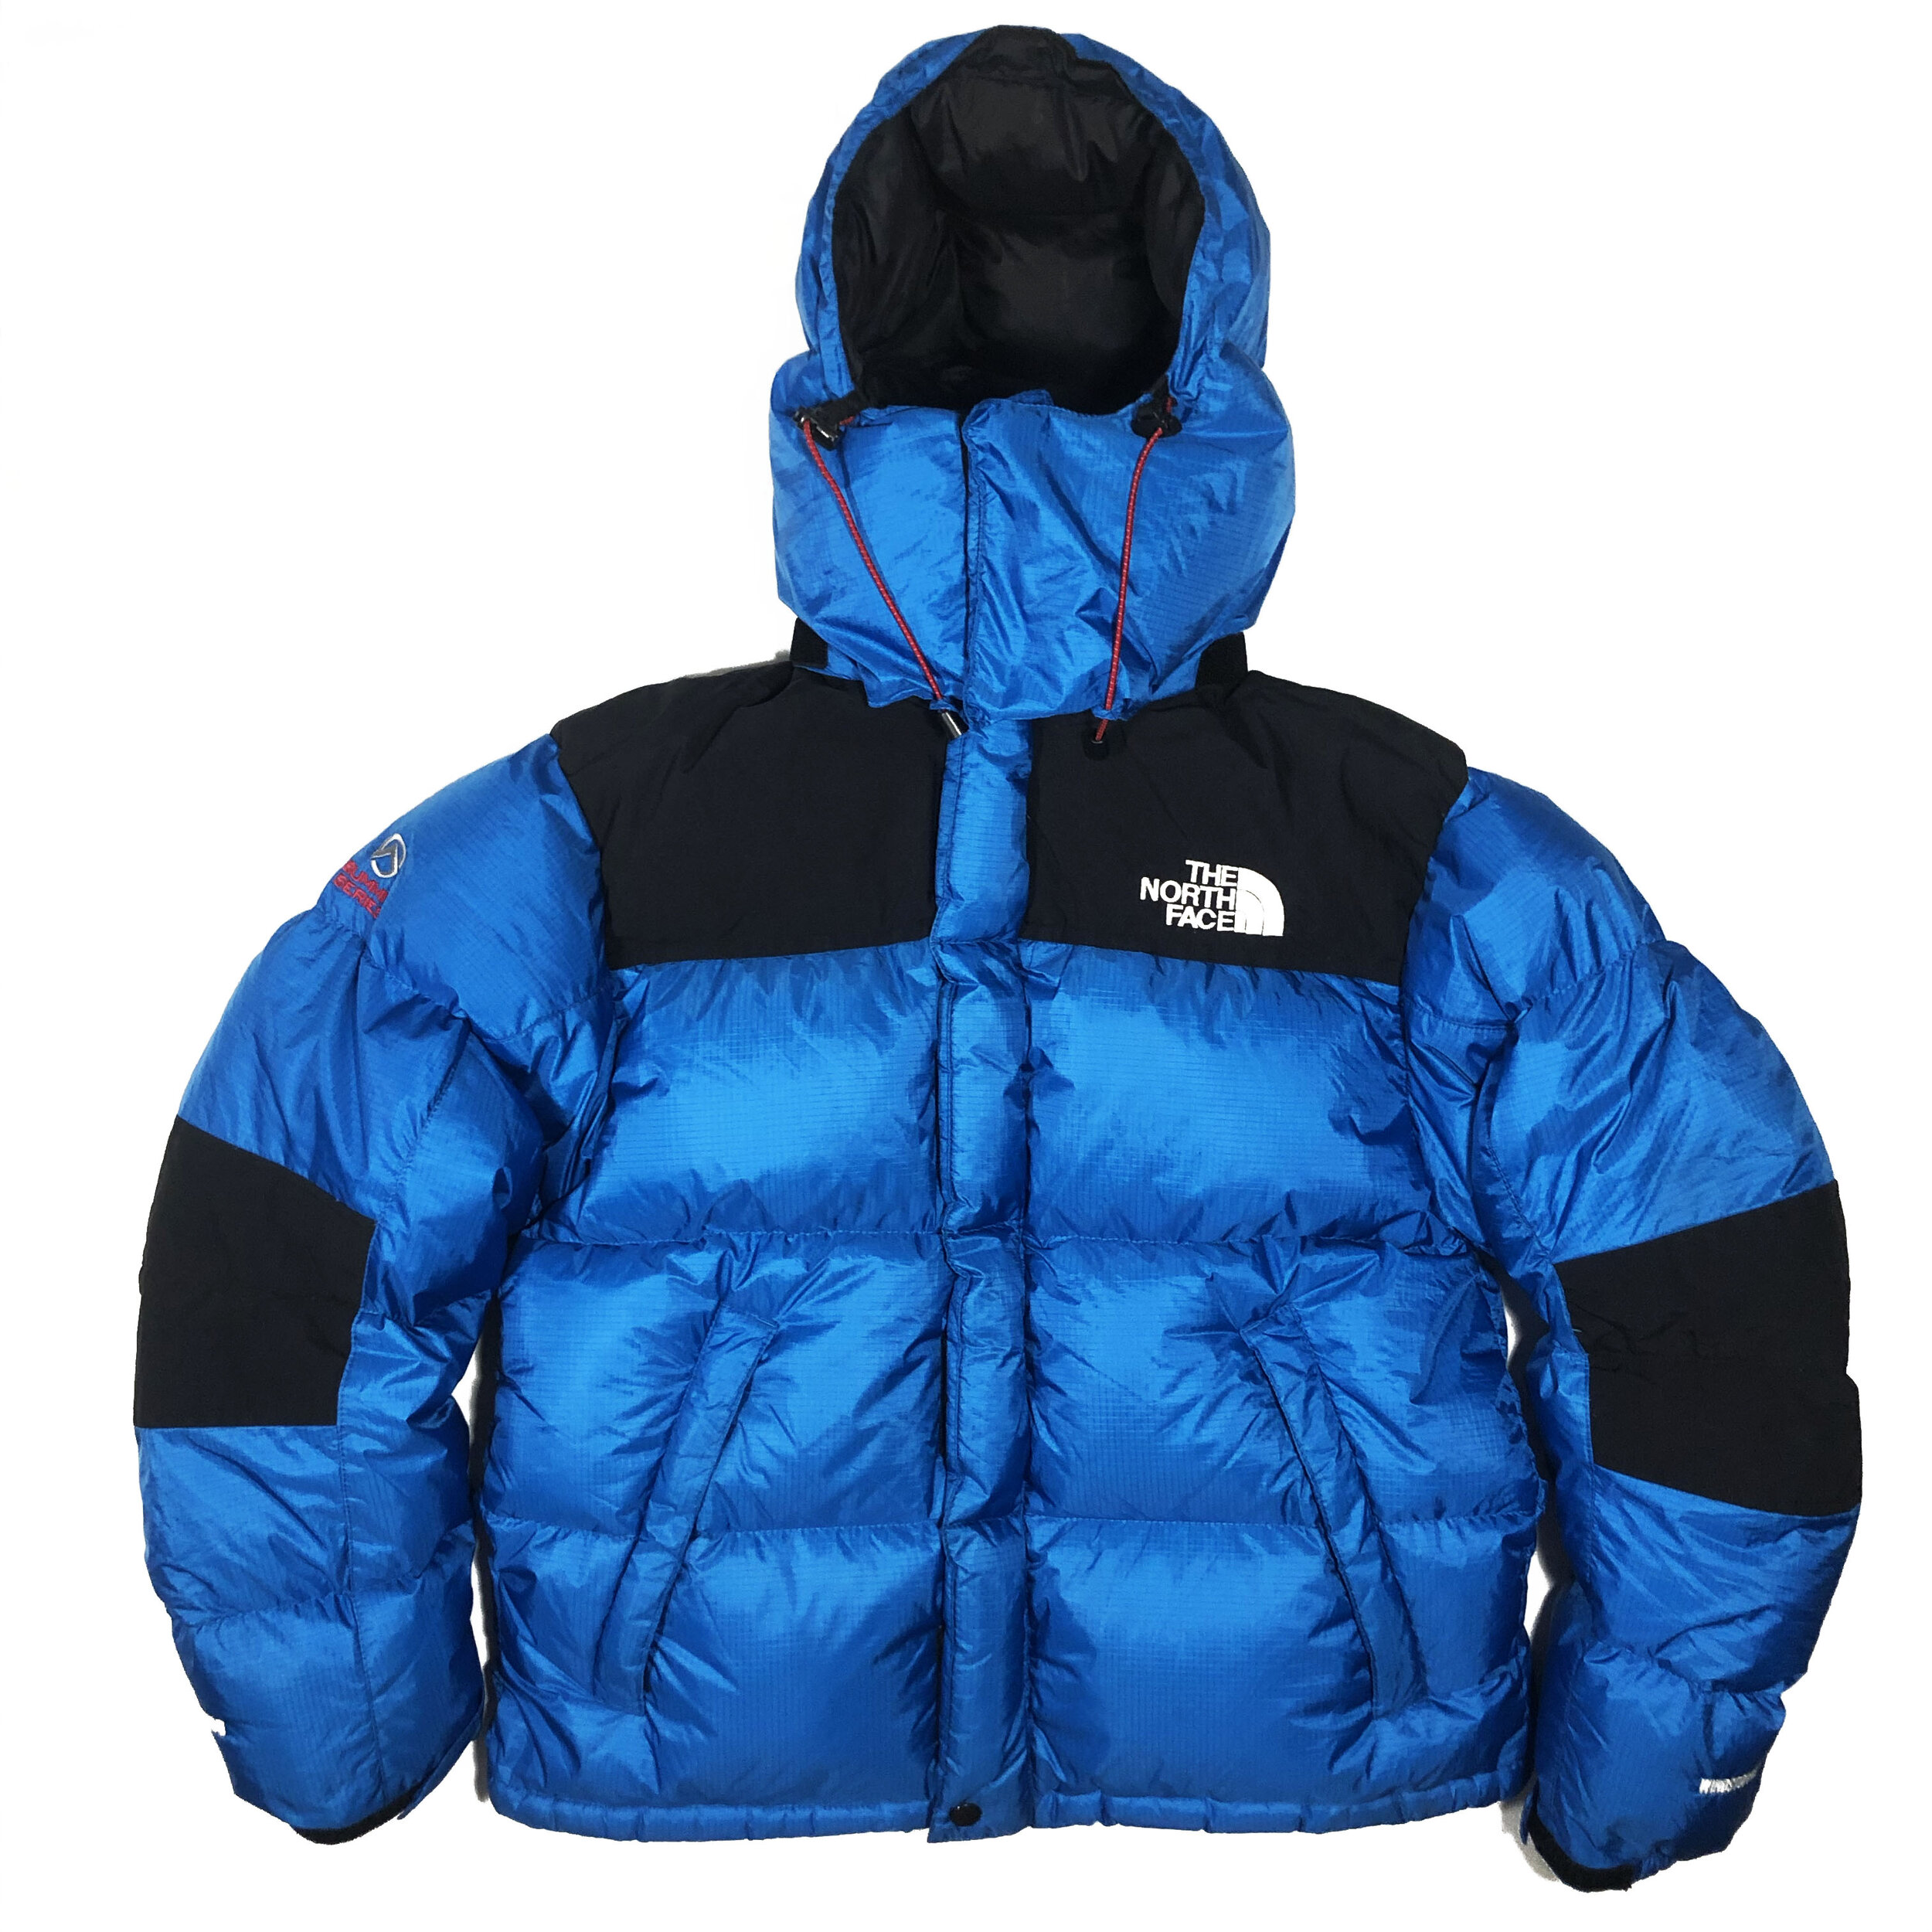 north face 700 series